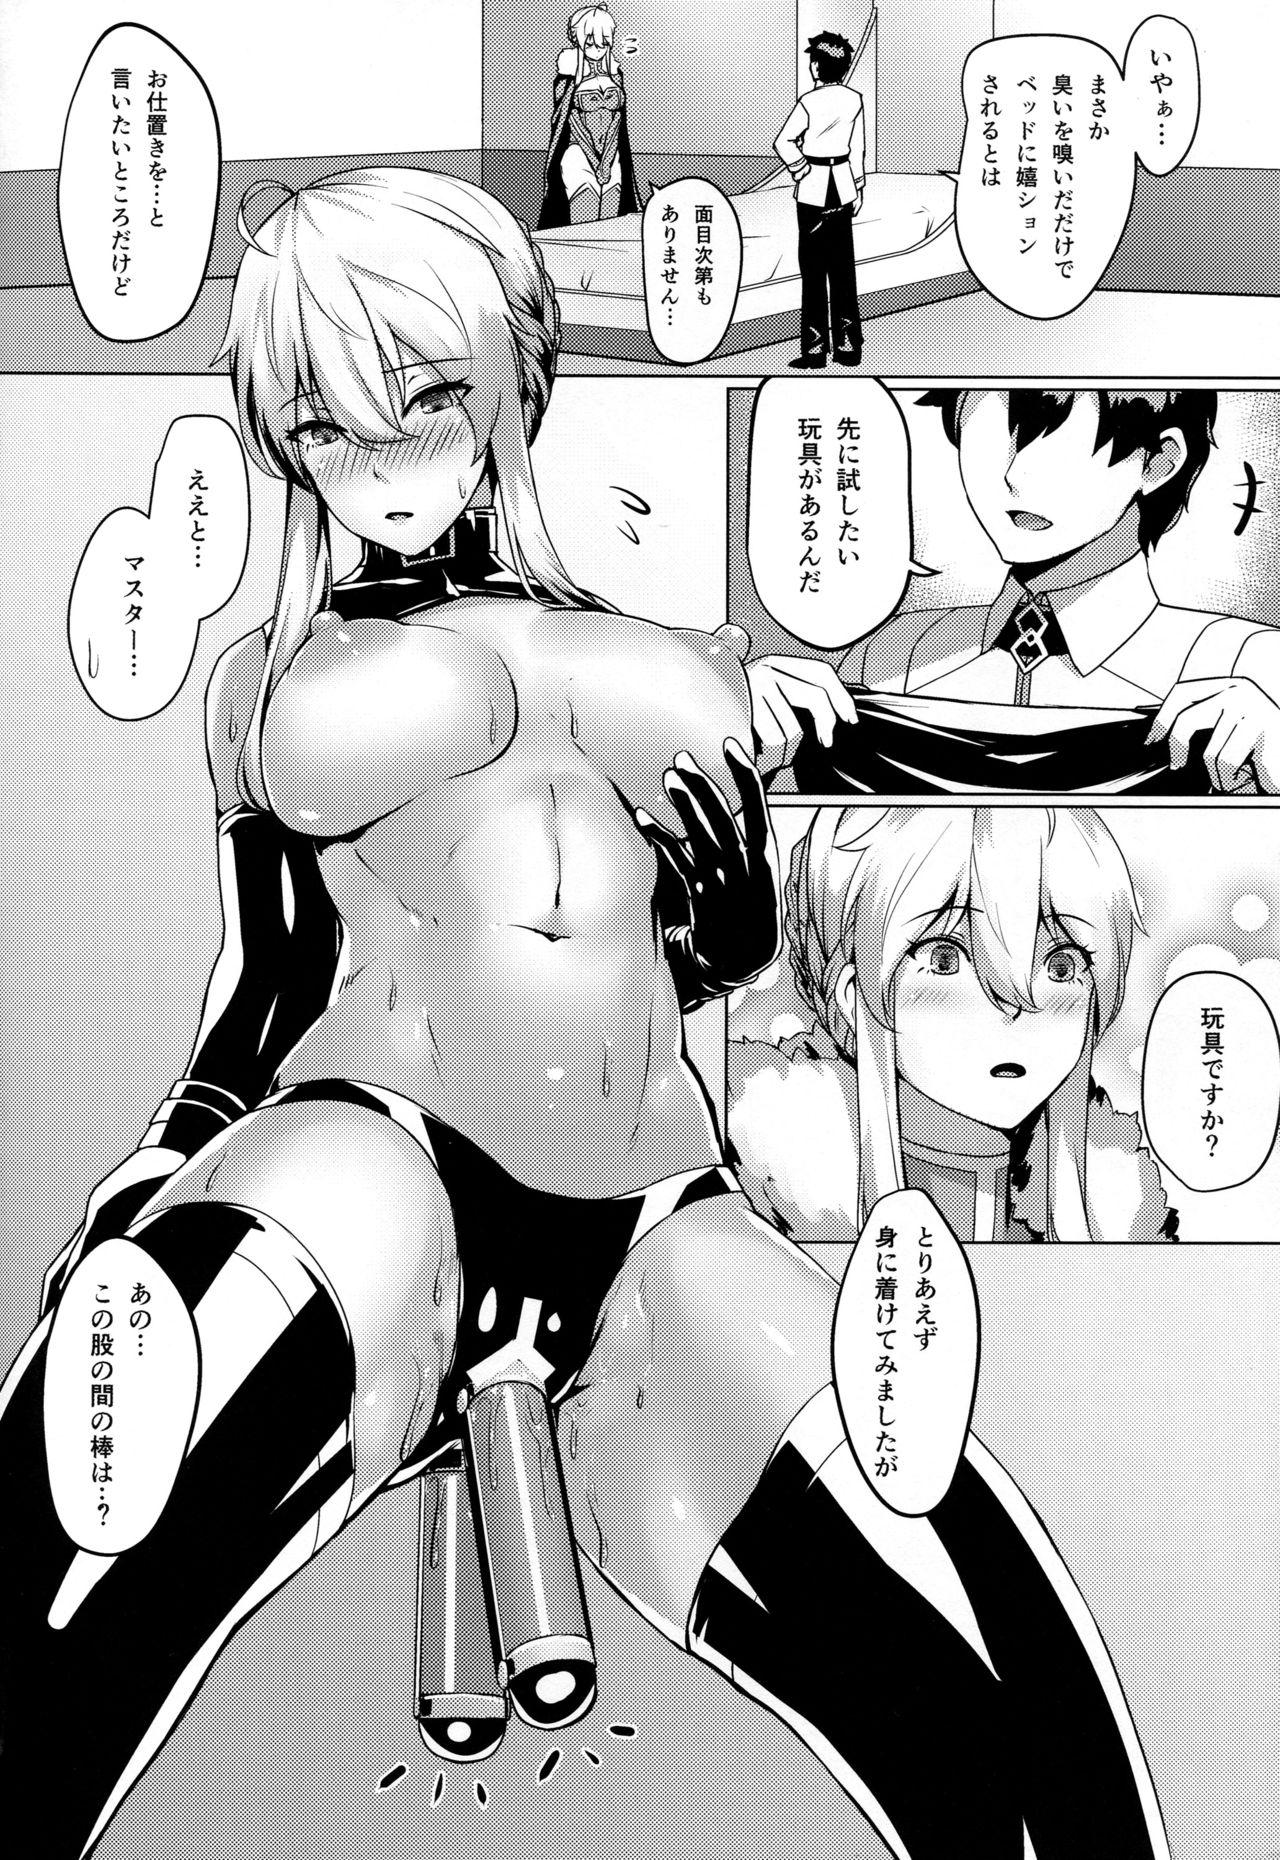 Couch Like Attracts Like - Fate grand order Chunky - Page 7